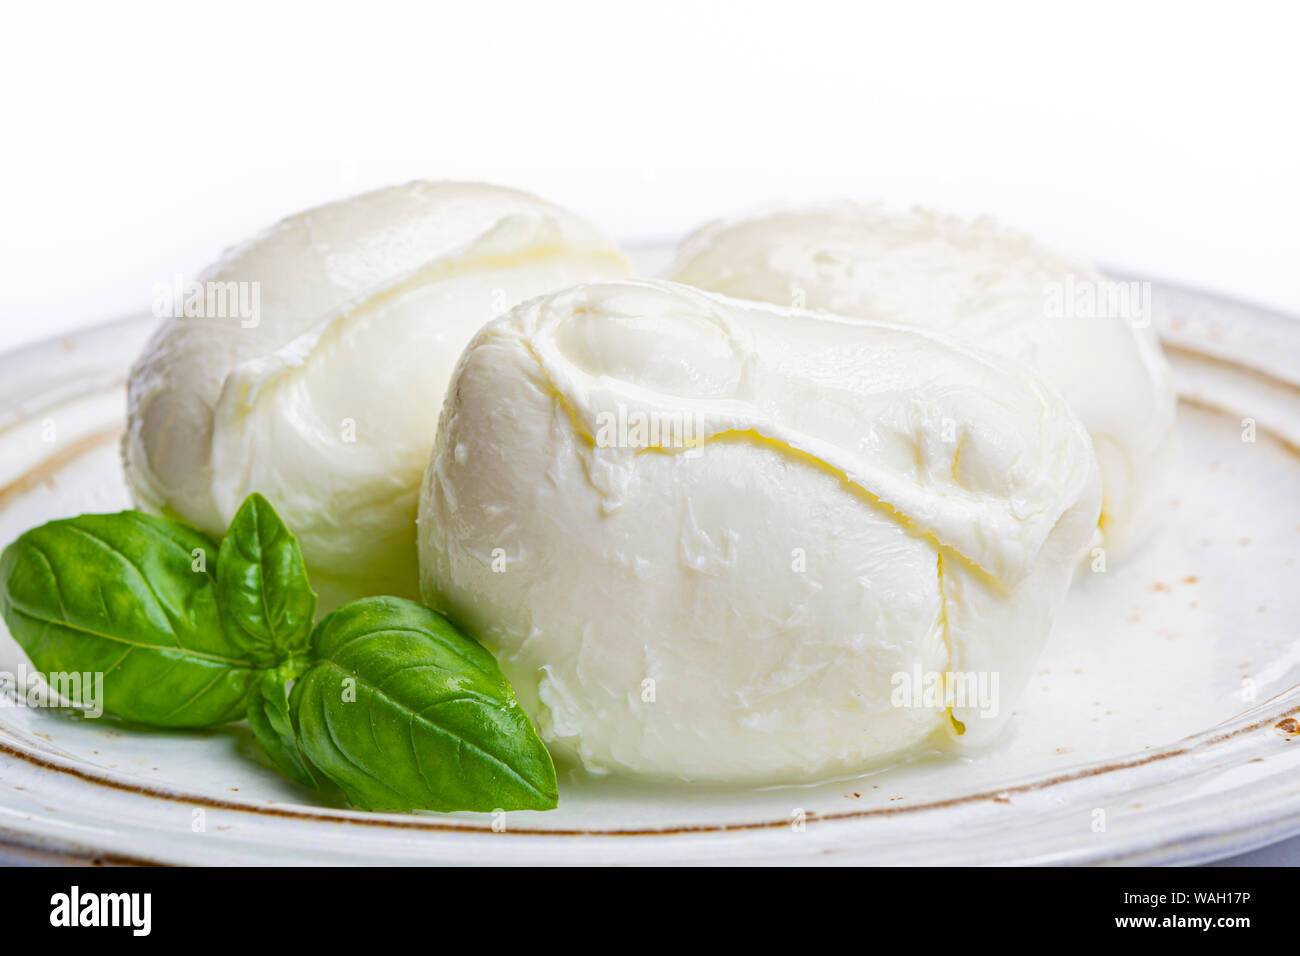 Italian soft cheese mozzarella, white cheese made from cow or buffalo milk  with fresh green basil herb close up Stock Photo - Alamy